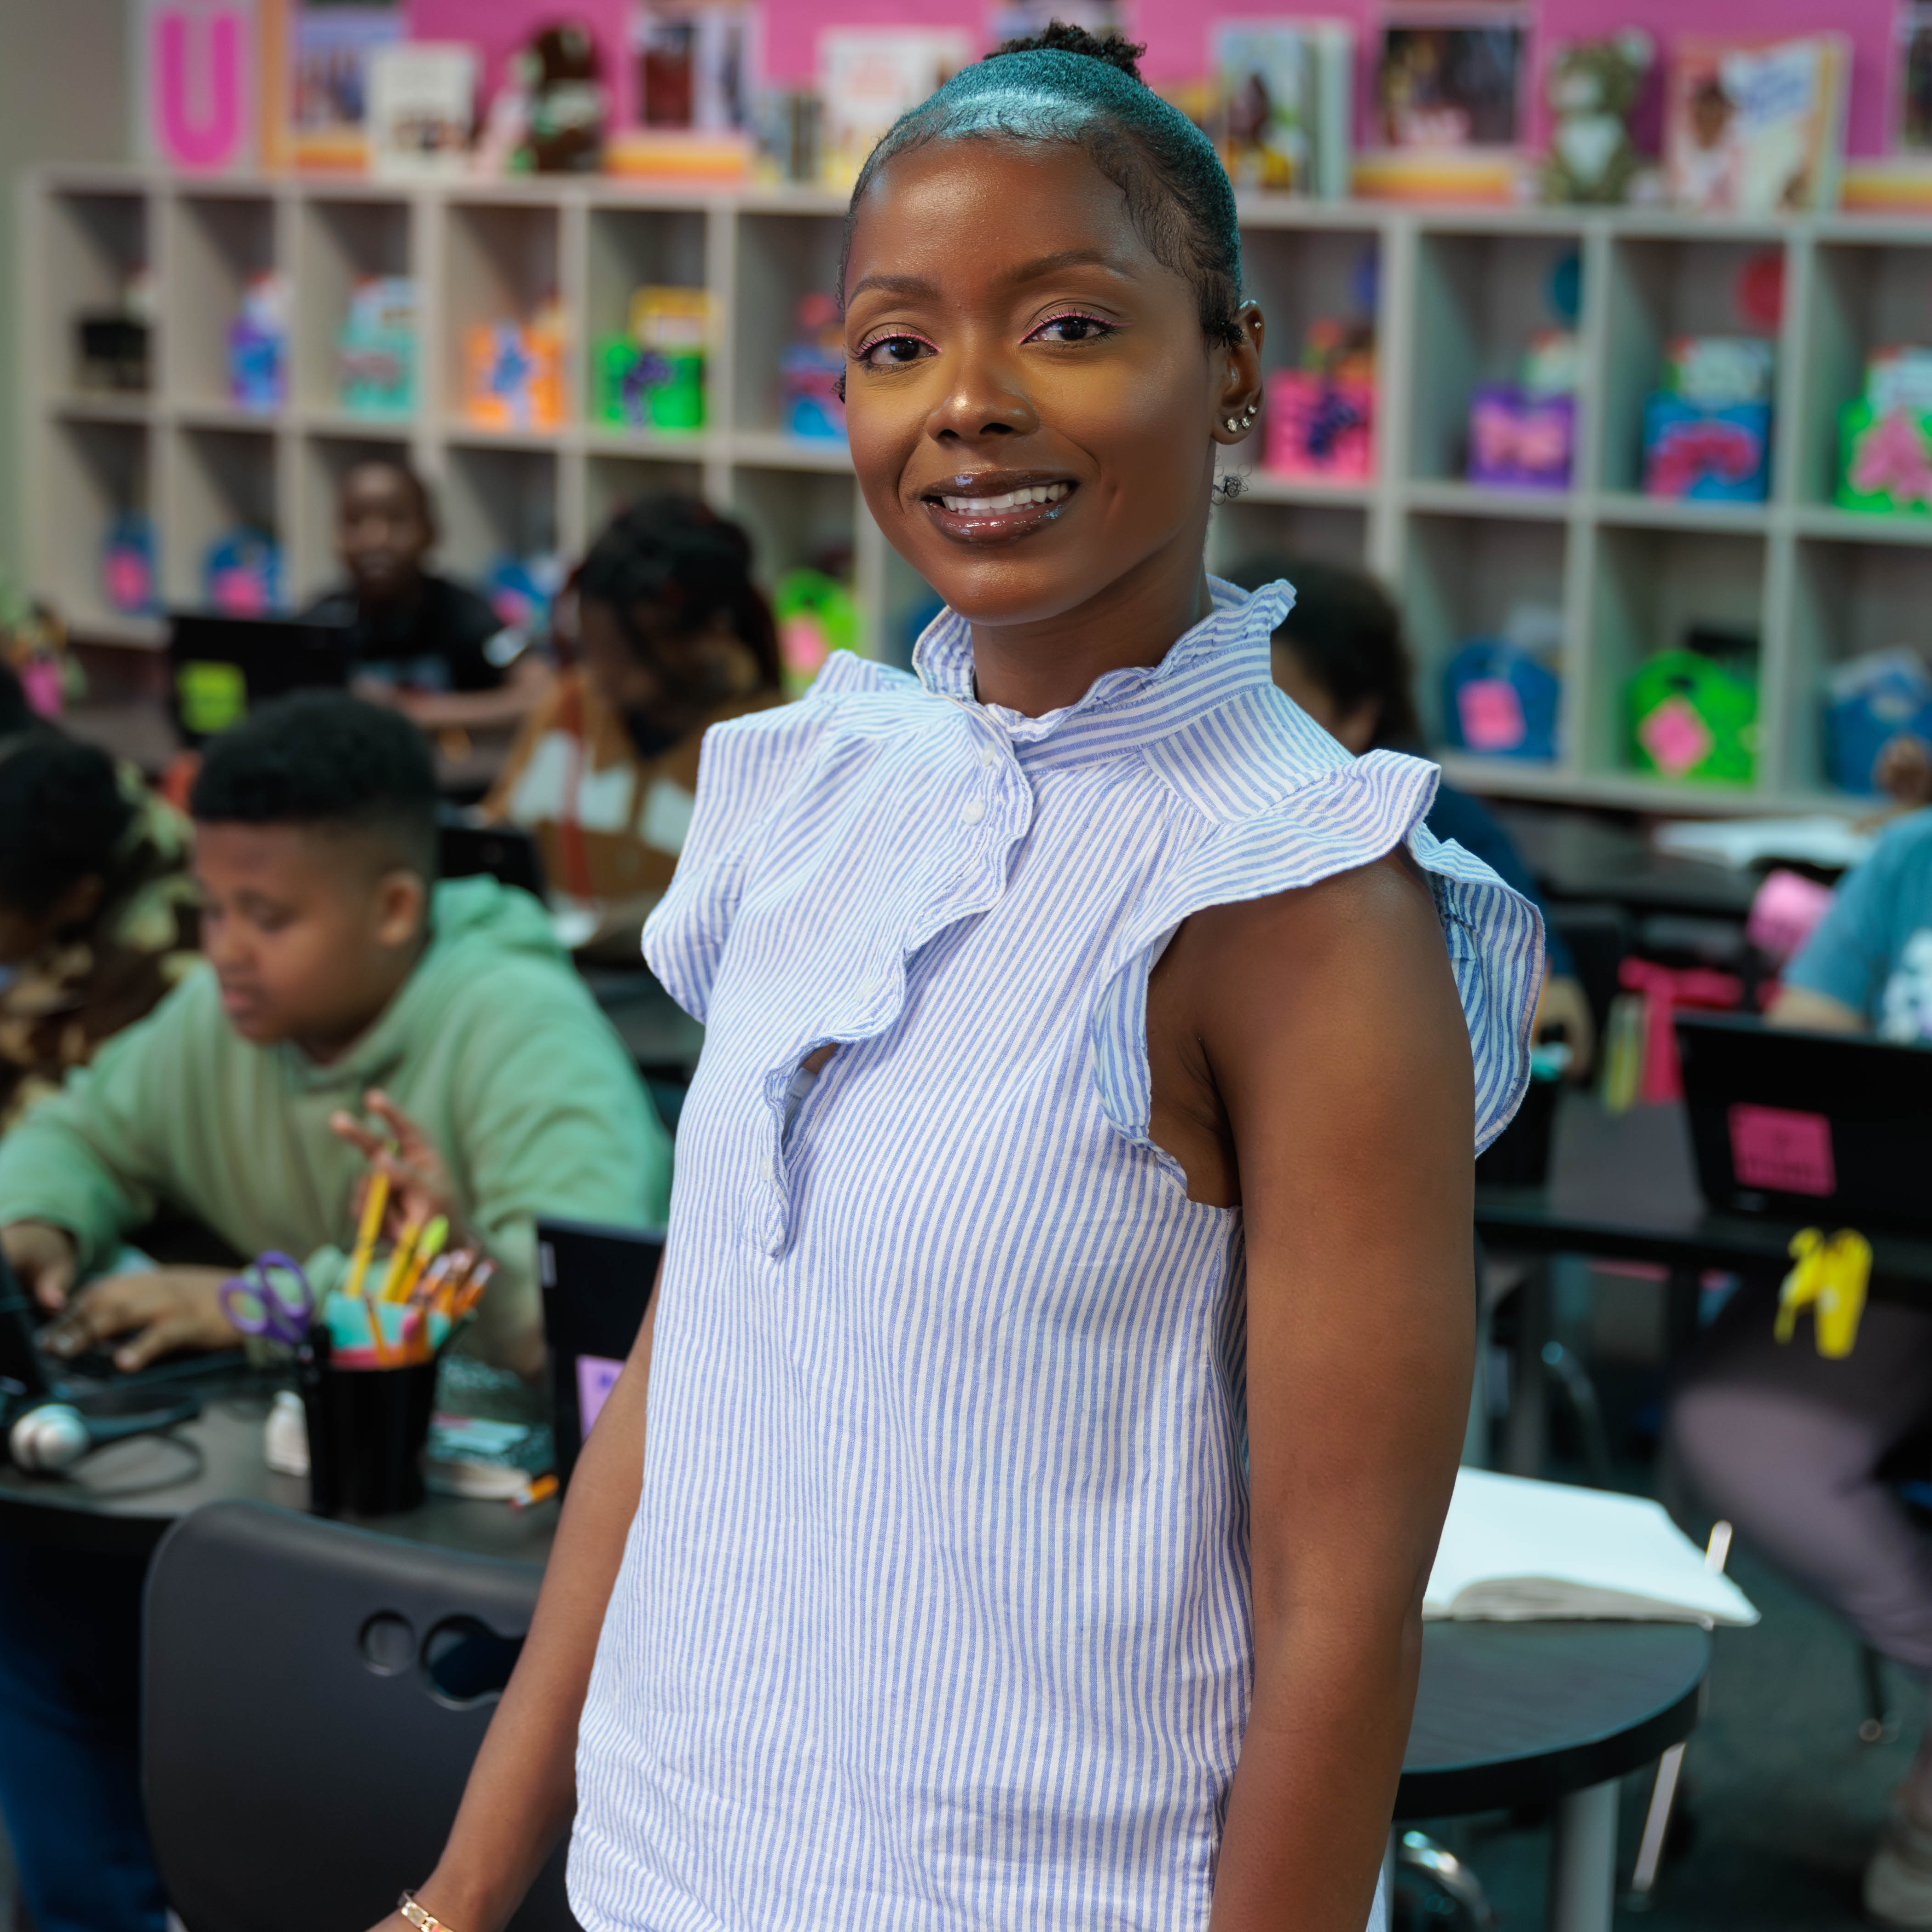 African American woman wearing a blue and white striped blouse standing in a classroom with students